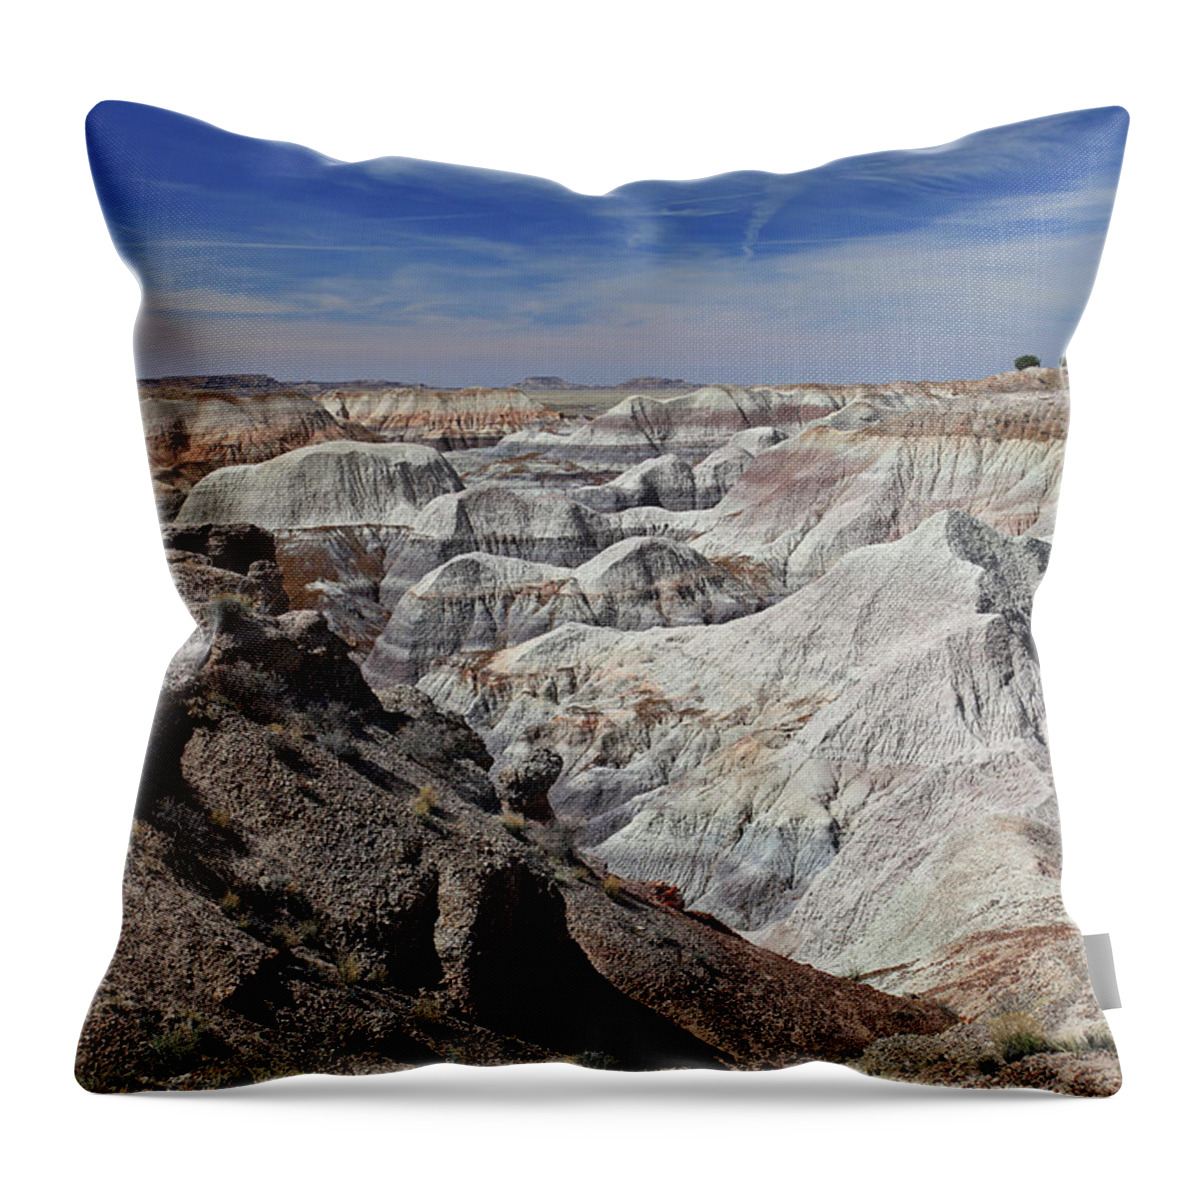 Arizona Throw Pillow featuring the photograph Evident Erosion by Gary Kaylor